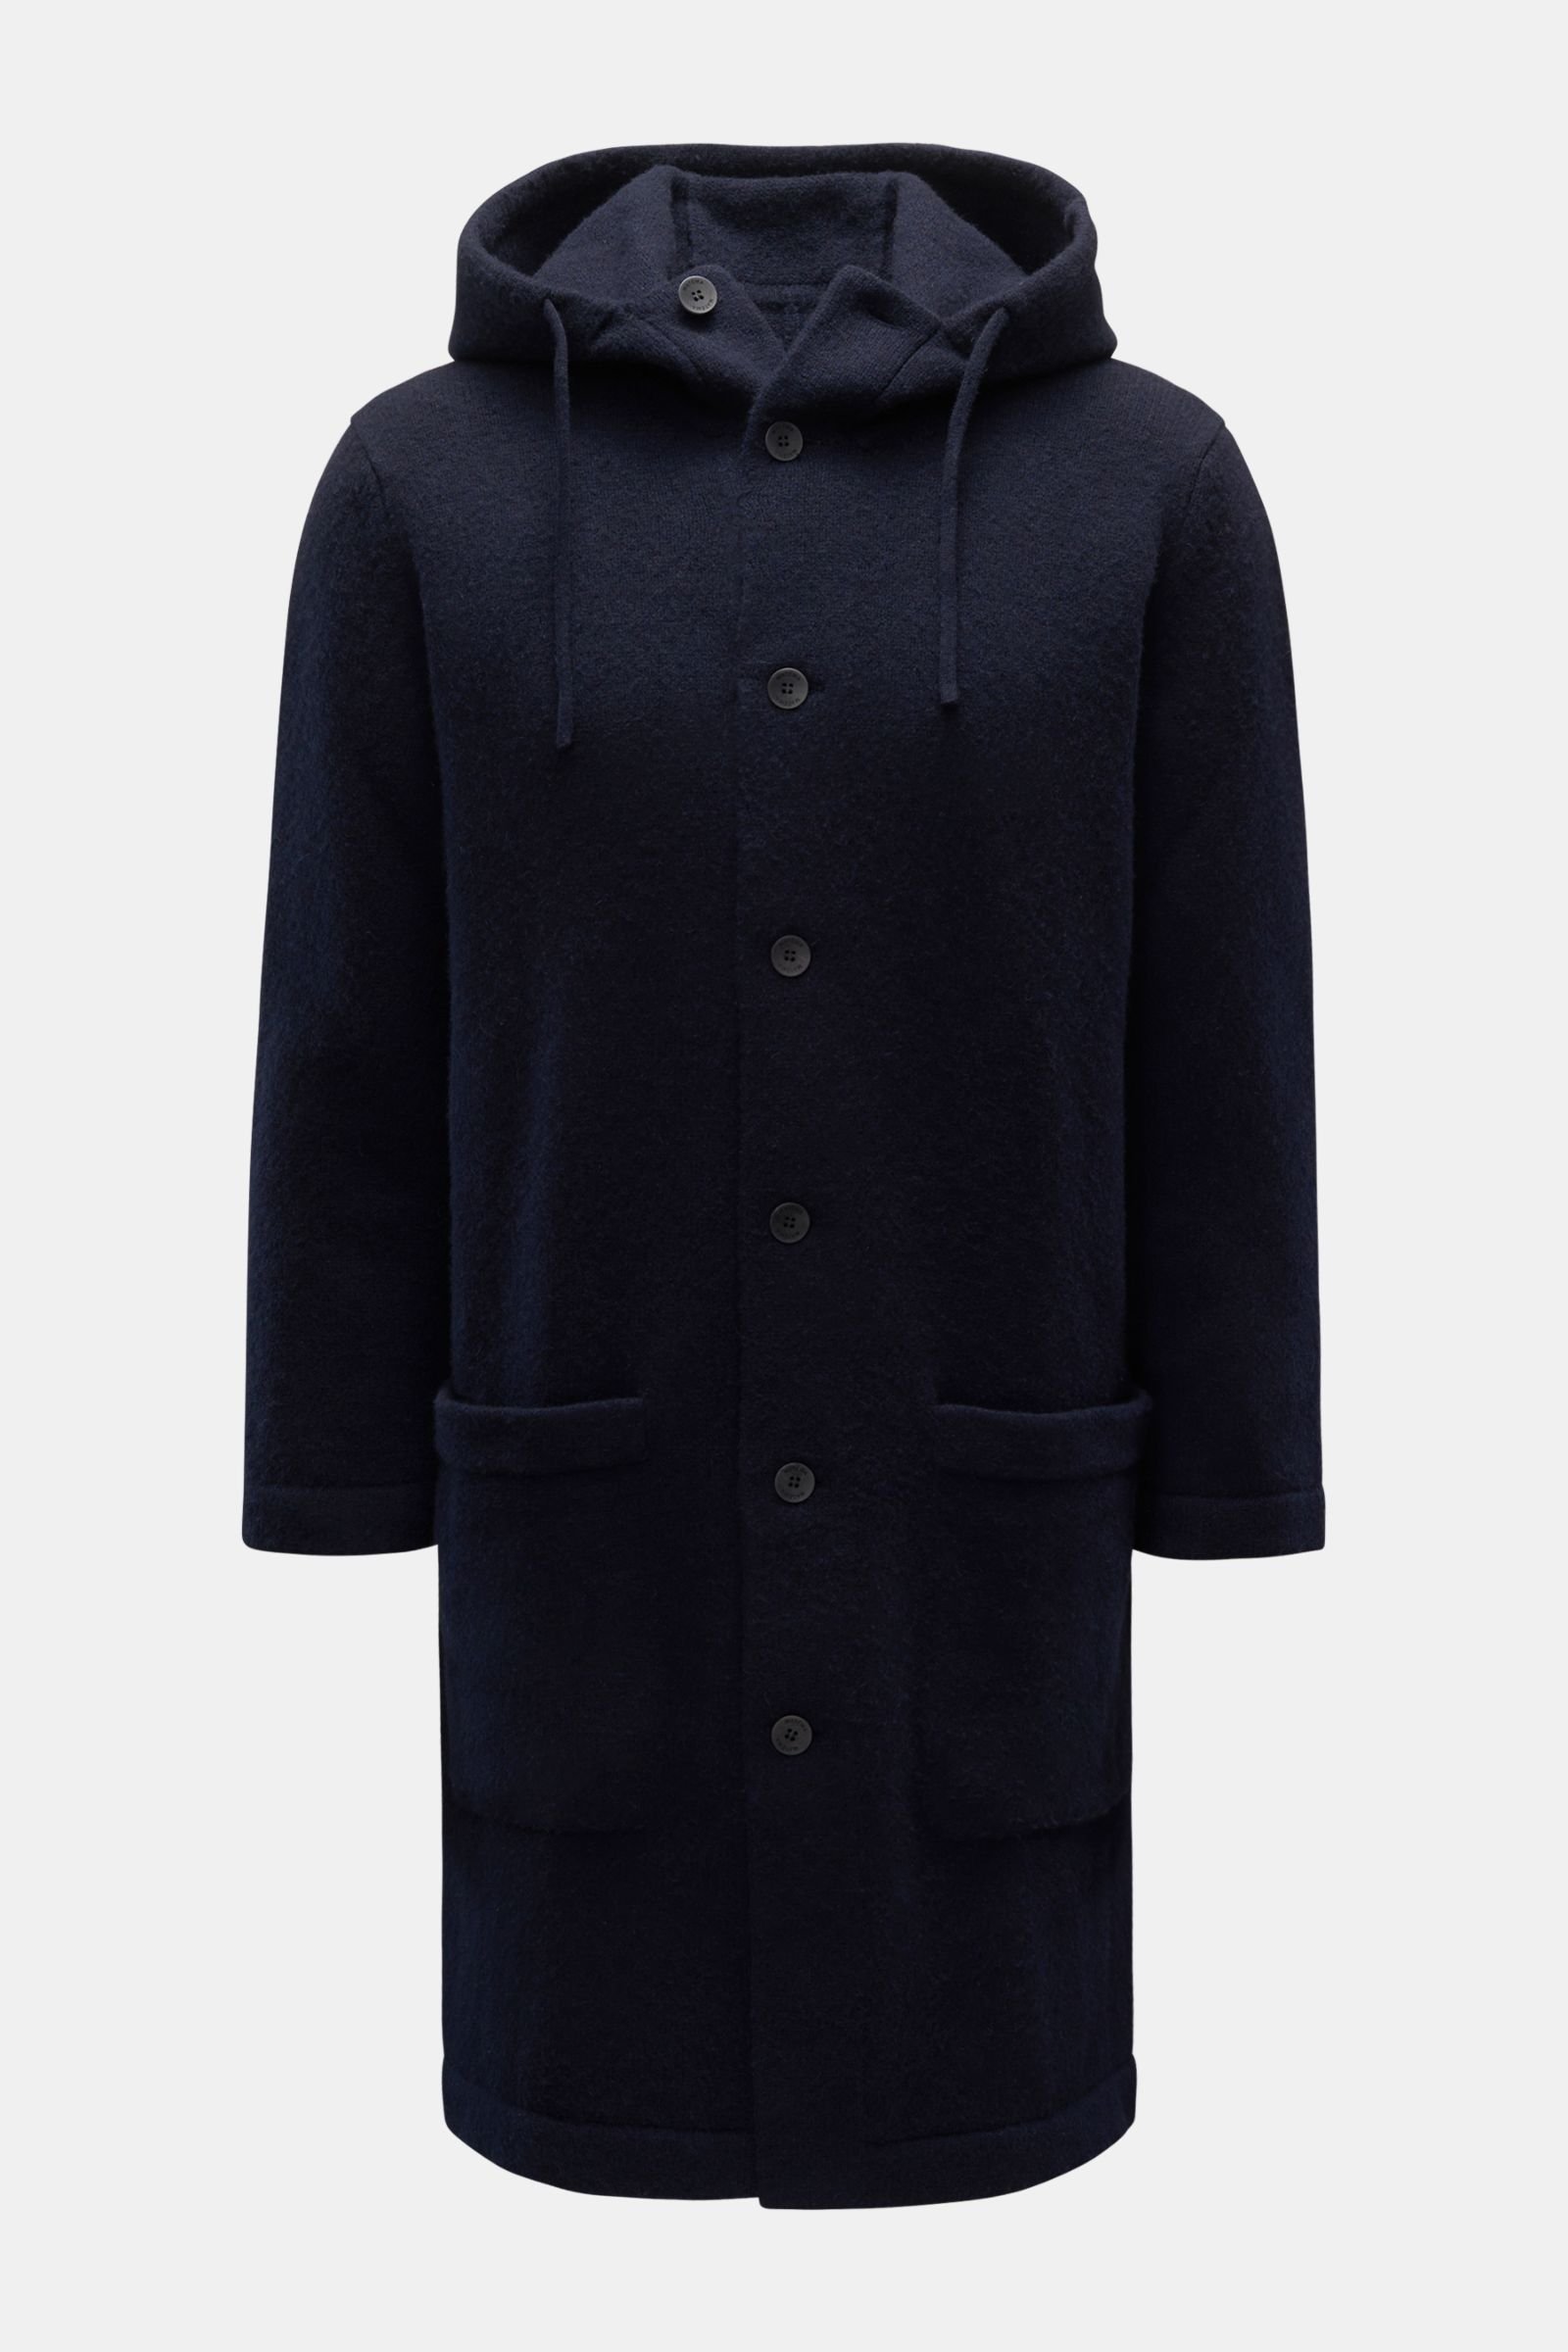 Knitted coat navy